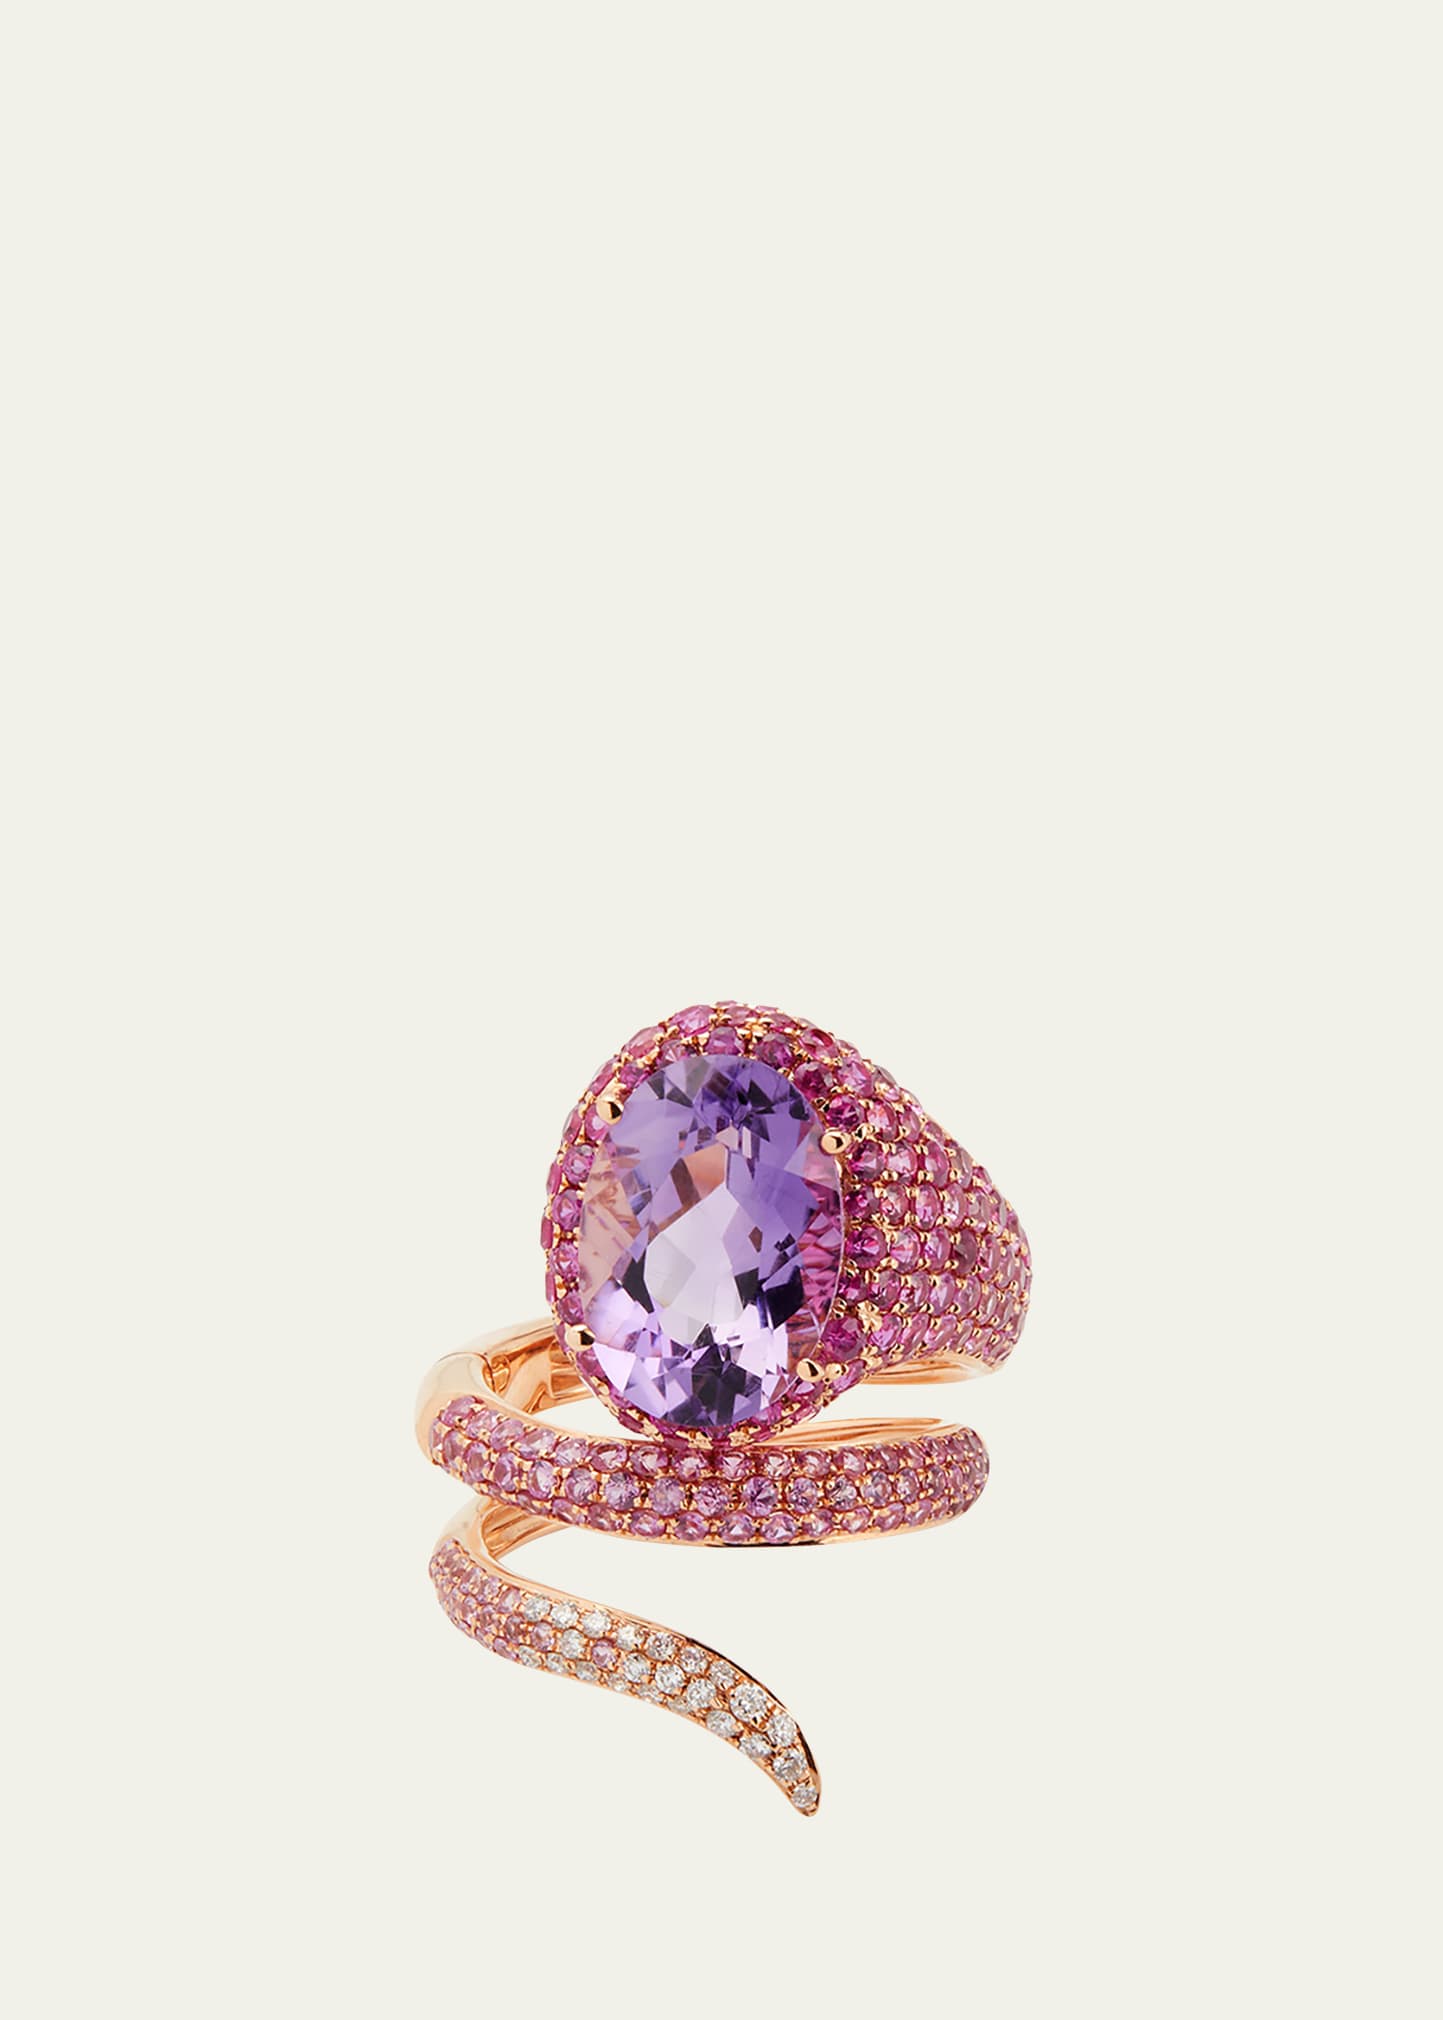 Rose Gold Pink Sapphire and Amethyst Convertible Ring with Diamond Halo, Size 7